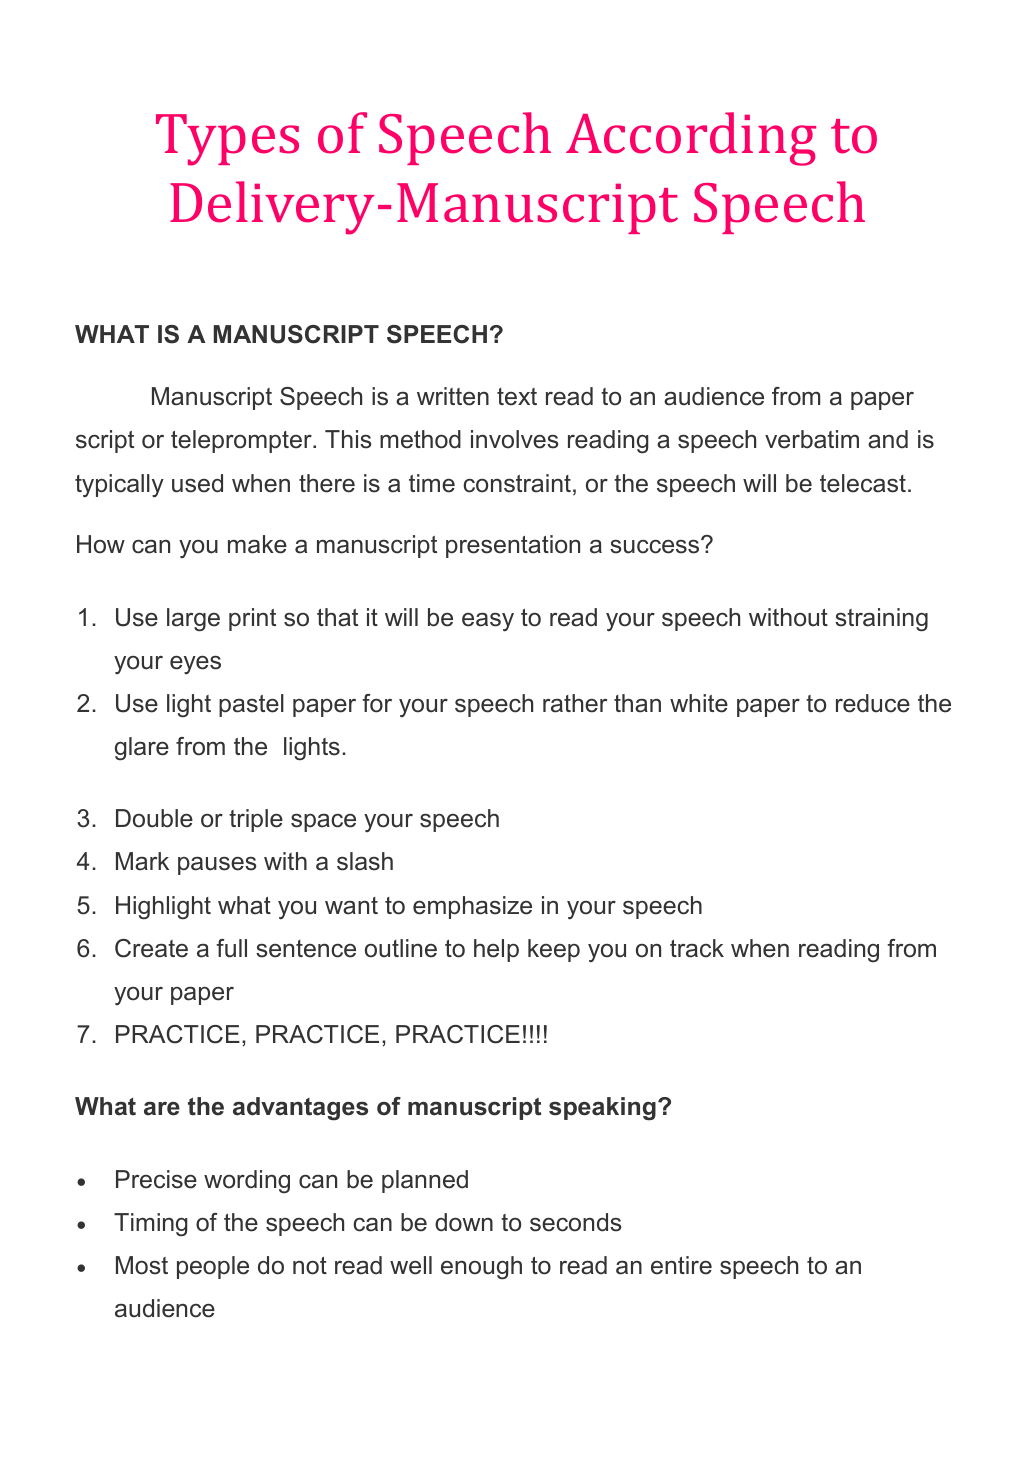 what is manuscript speech delivery